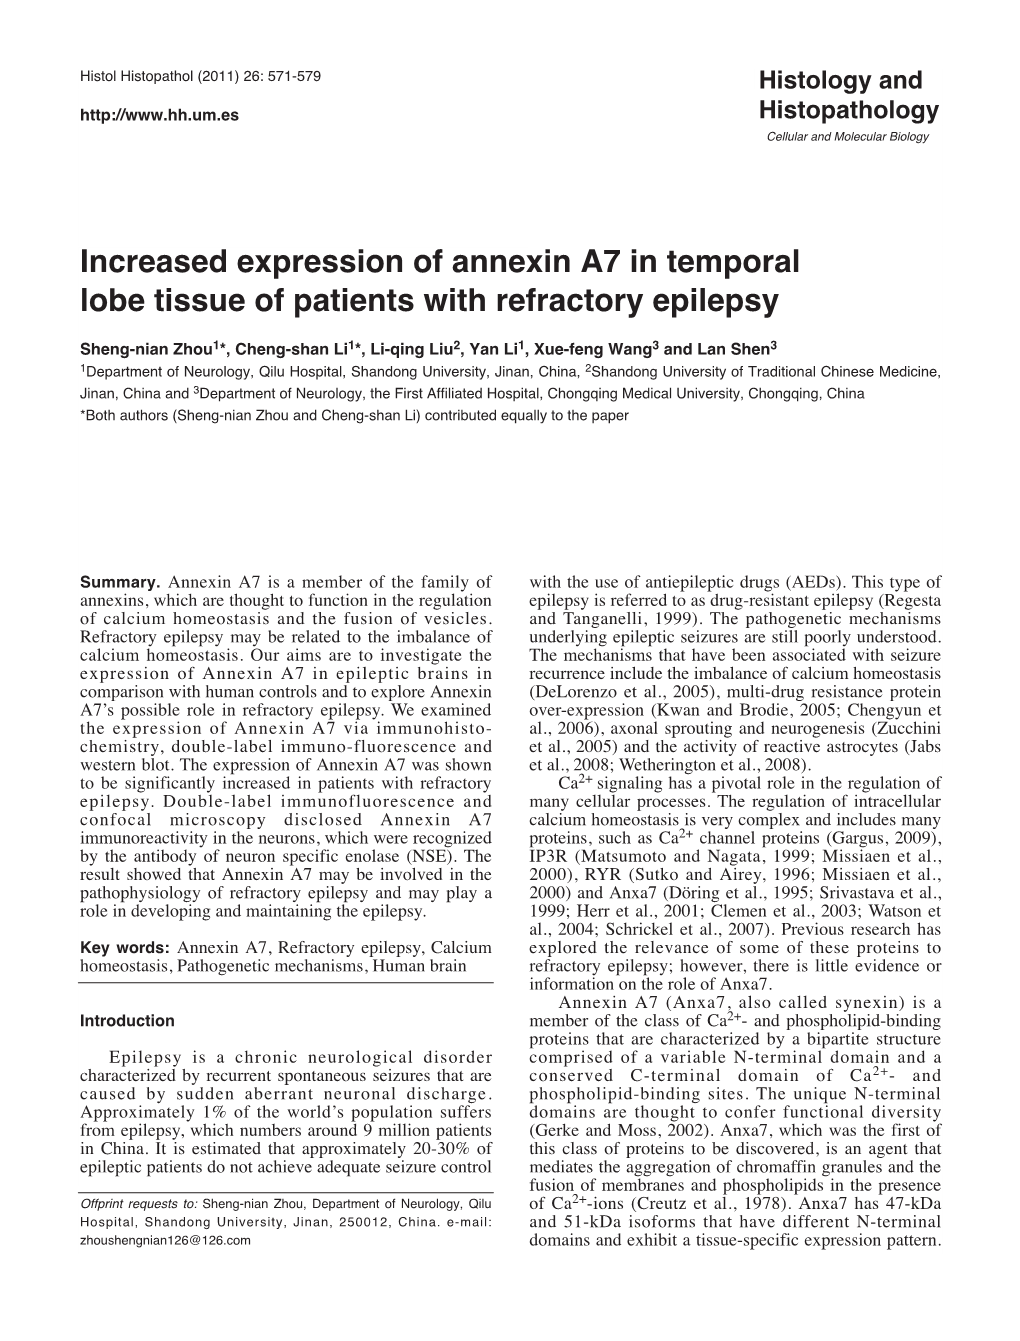 Increased Expression of Annexin A7 in Temporal Lobe Tissue of Patients